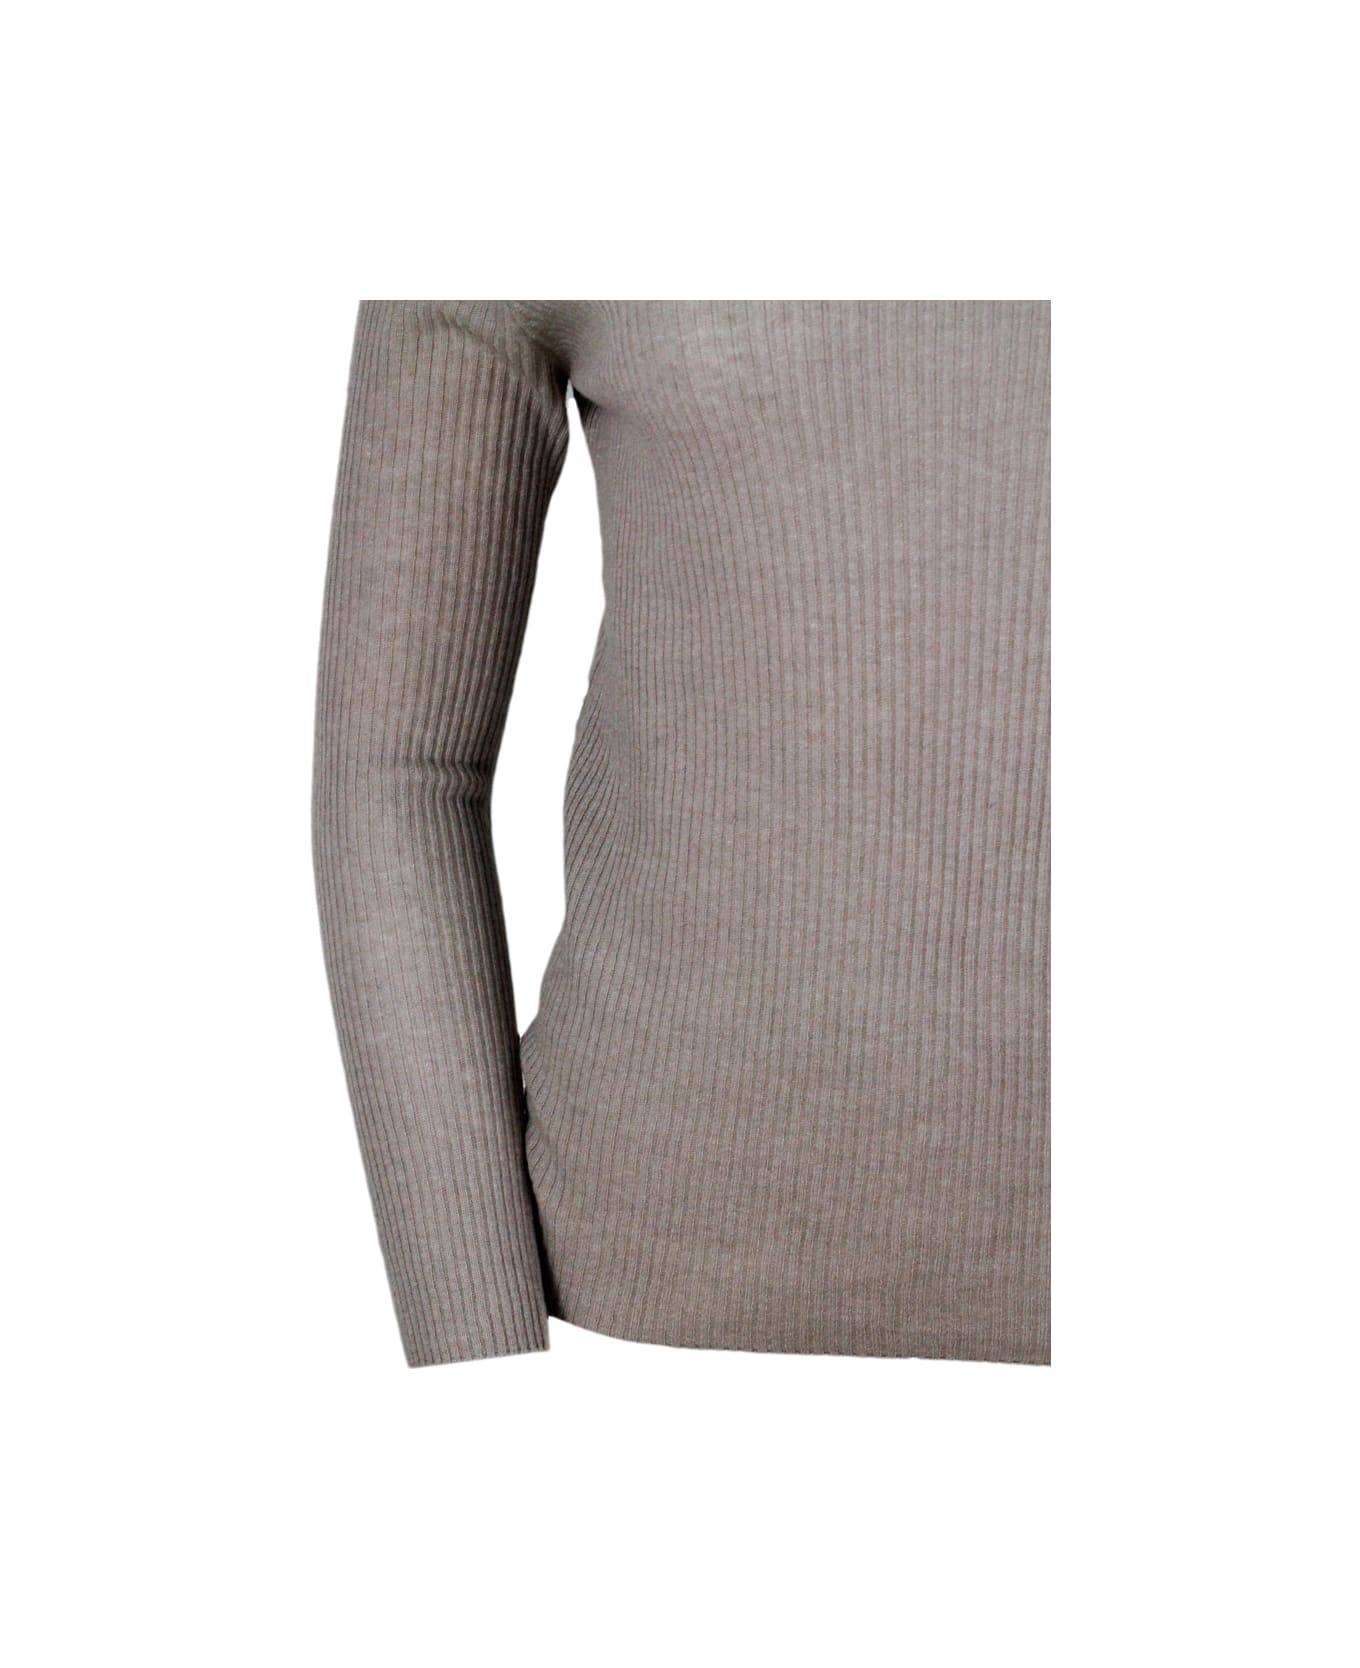 Fabiana Filippi Lightweight Turtleneck Long-sleeved Sweater In Soft And Fine Wool, Silk And Cashmere With Small Rib Knit - Nut ニットウェア